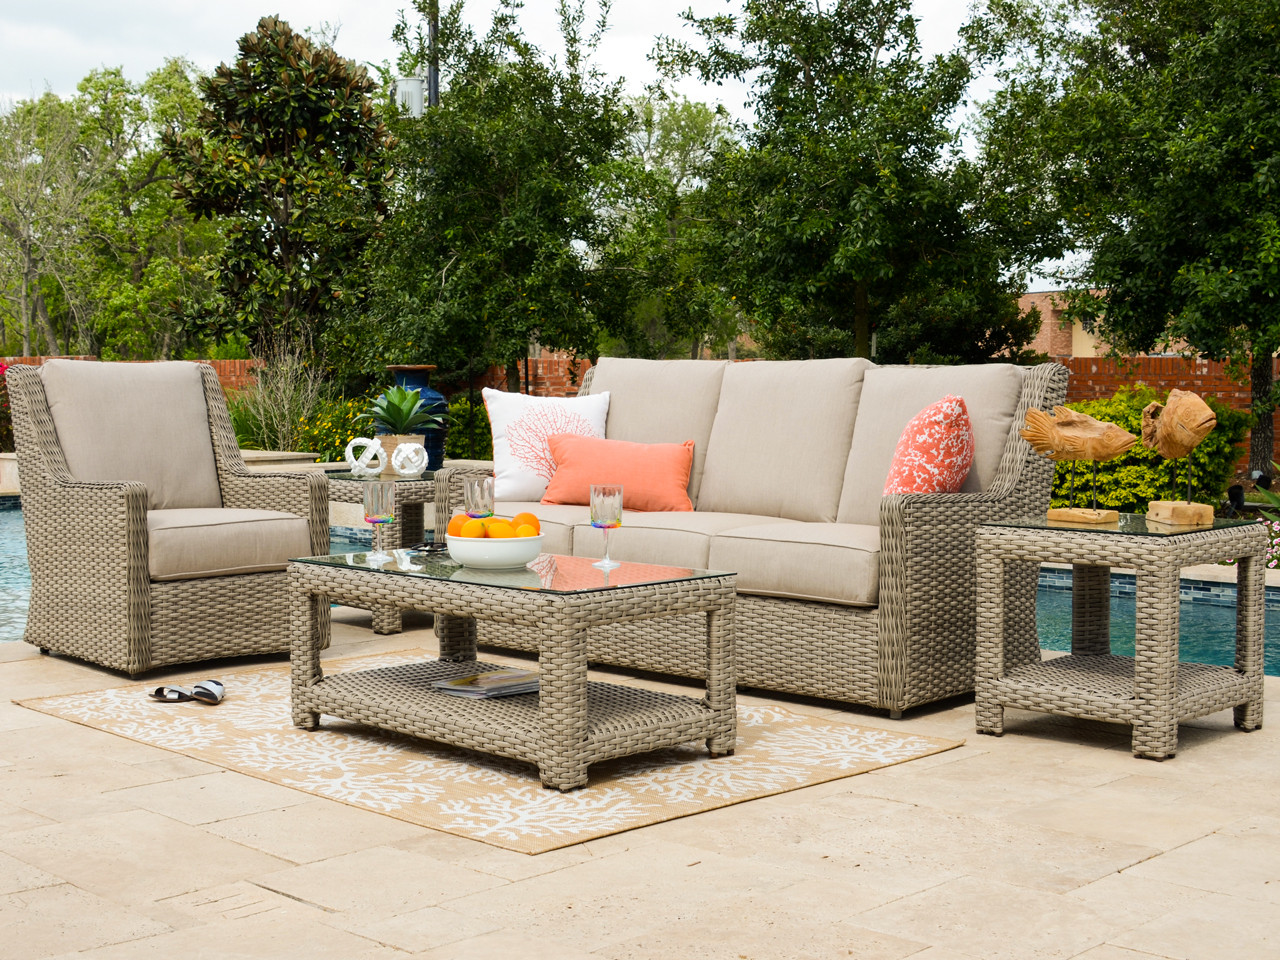 Como Sandpiper Outdoor Wicker and Cast Ash Cushion 3 Pc. Sofa Group with 44 x 24 in. Coffee Table